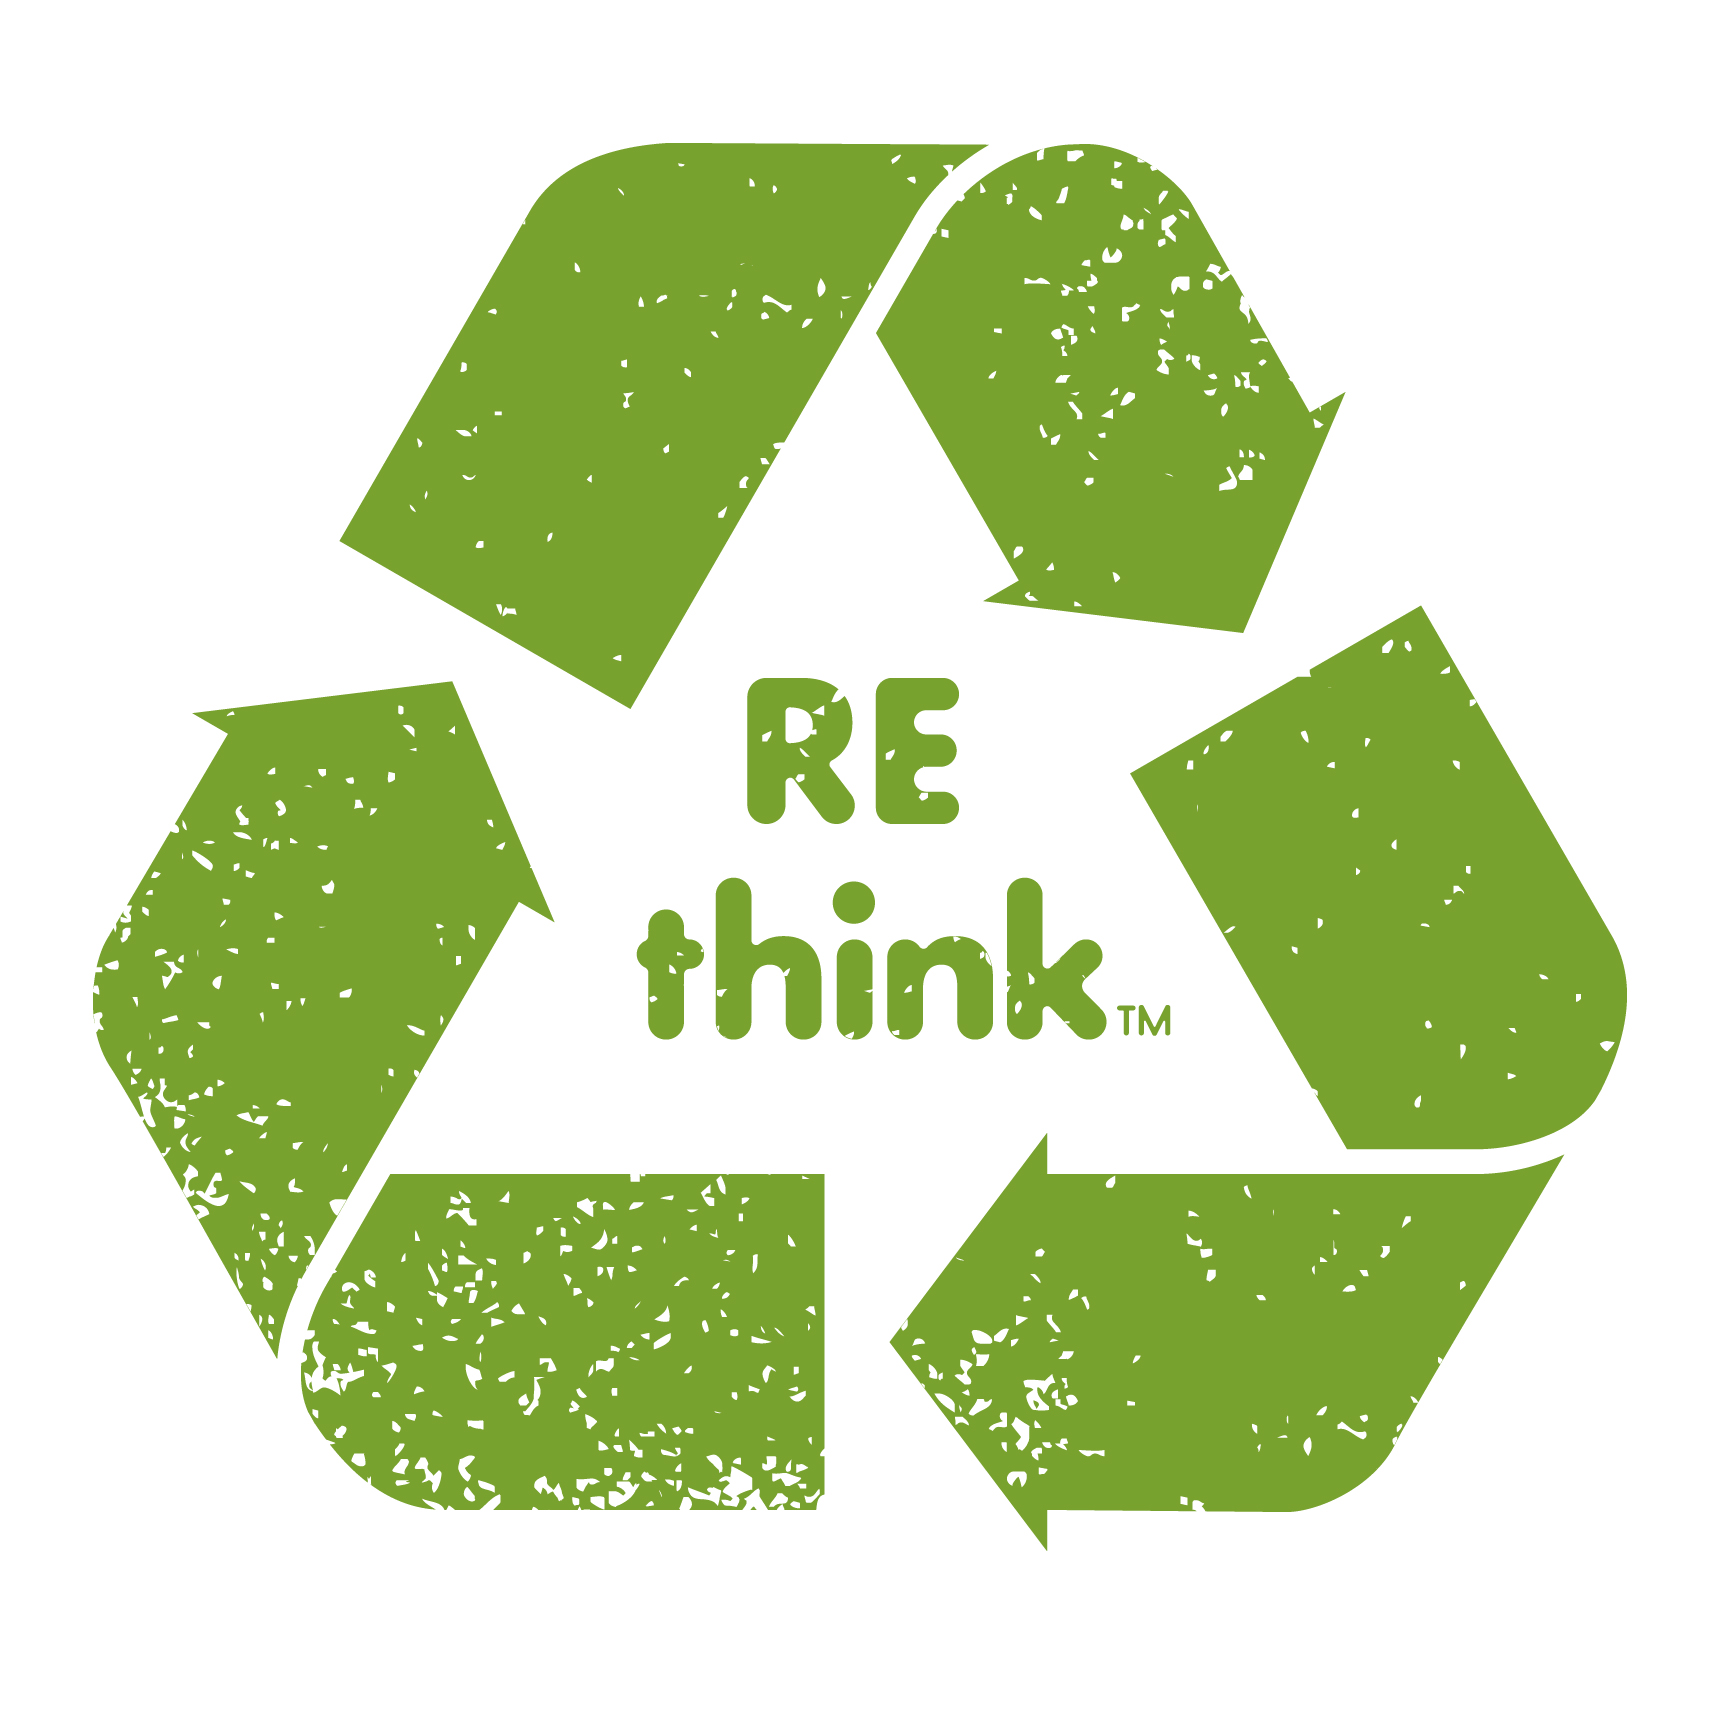 Reduce mean. Reduce reuse recycle. Reduce экология. Знак reduce reuse recycle. Концепция reuse reduce recycle.